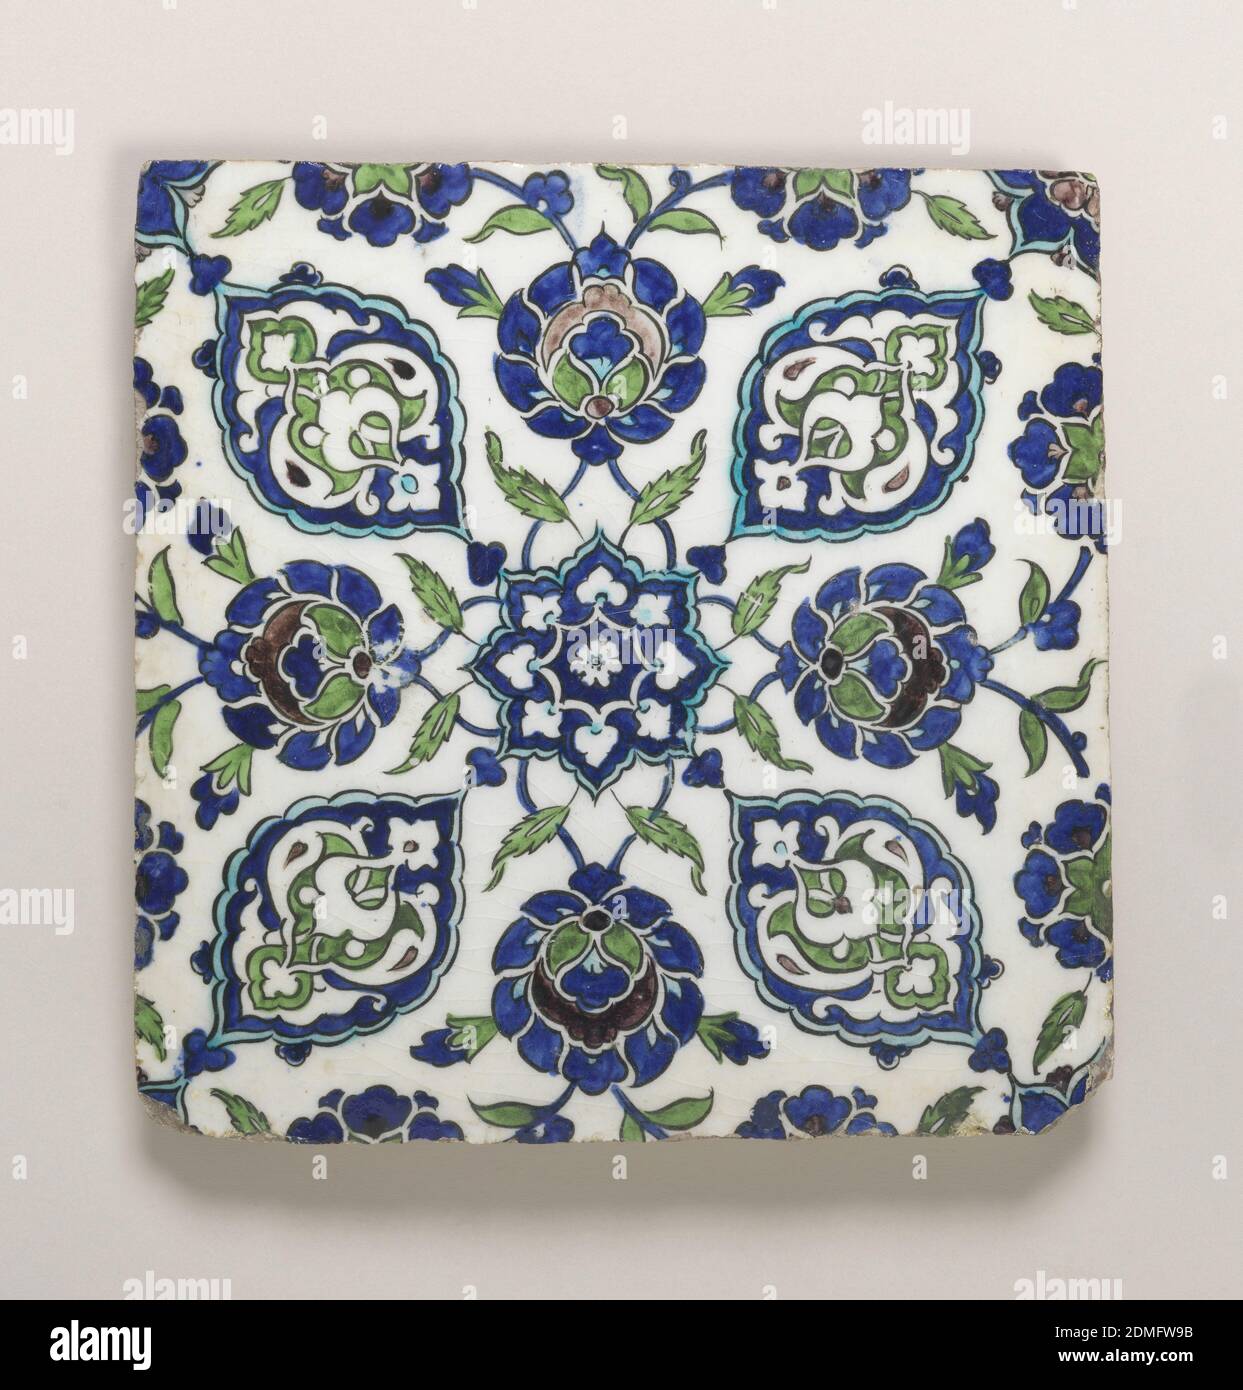 Tile, Tin-glazed earthenware, underglaze decoration, Square in shape, painted with an 8-pointed blossom in the center, from which radiate stylized floral arabesques and blossoms., Ottoman Empire (possibly Syria), late 16th–early 17th century, tiles, Decorative Arts, Tile Stock Photo